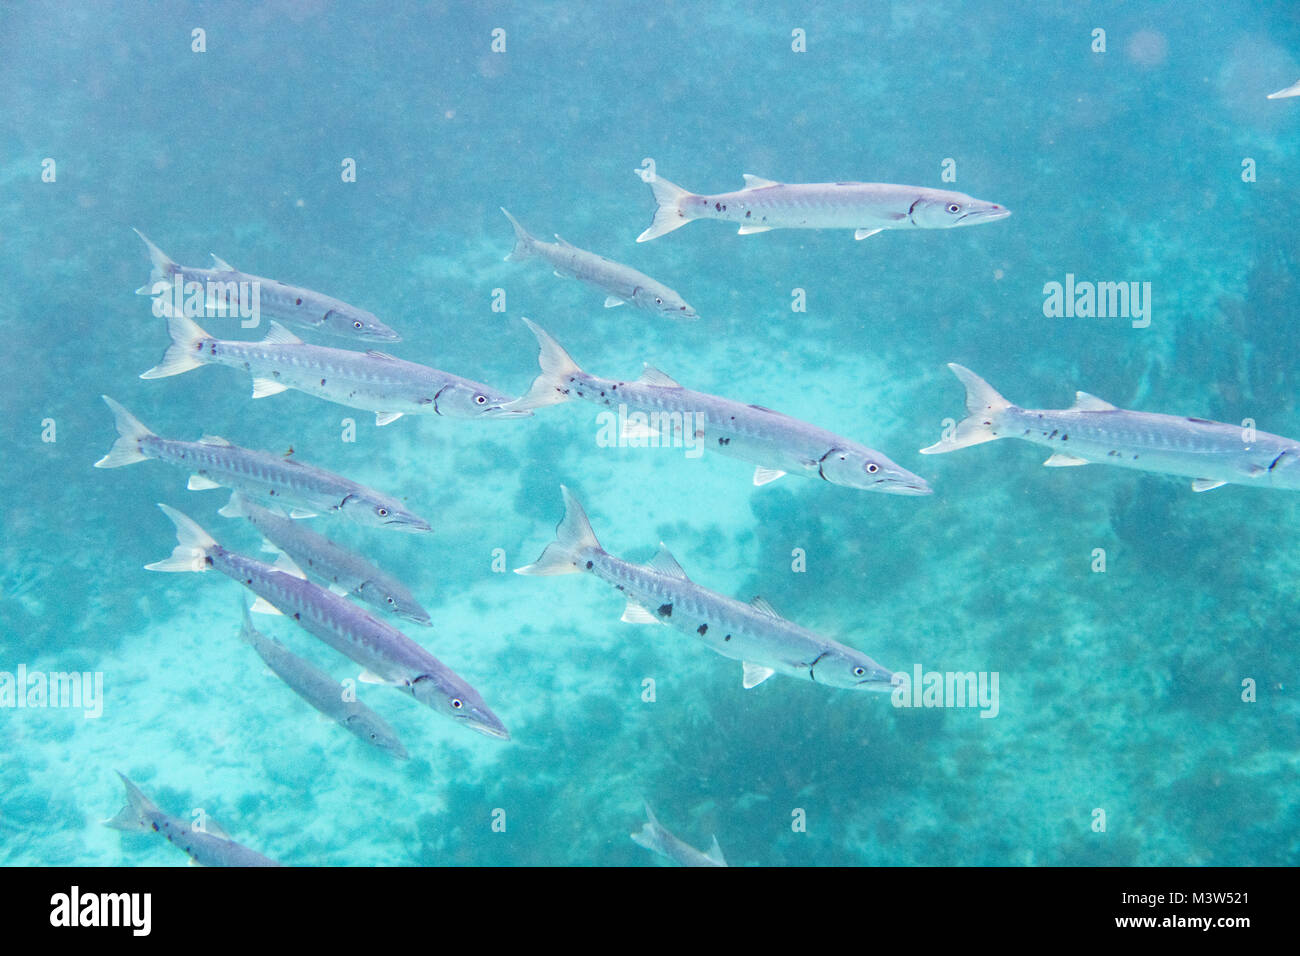 The great barracuda (Sphyraena barracuda) also known as the giant barracuda, is a common species of barracuda found in subtropical oceans around the w Stock Photo